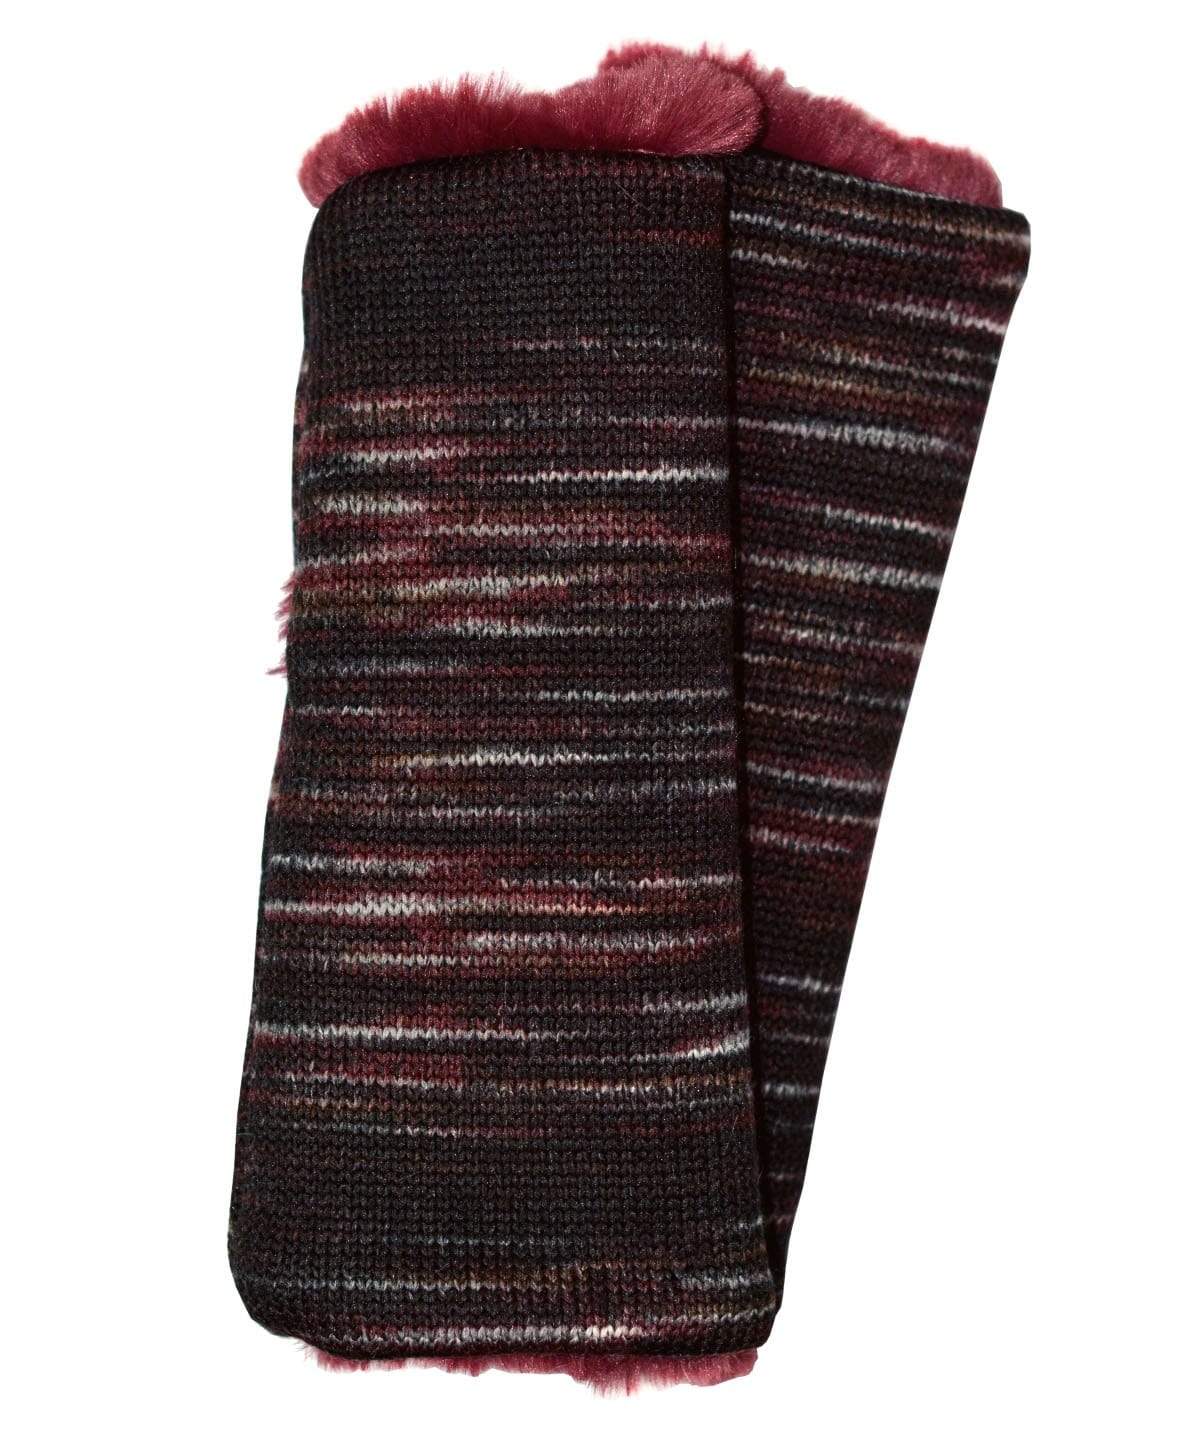 Reversible Fingerless Gloves | Sweet Stripes in Cherry Cordial with Cranberry Creek Faux Fur | Pandemonium Millinery